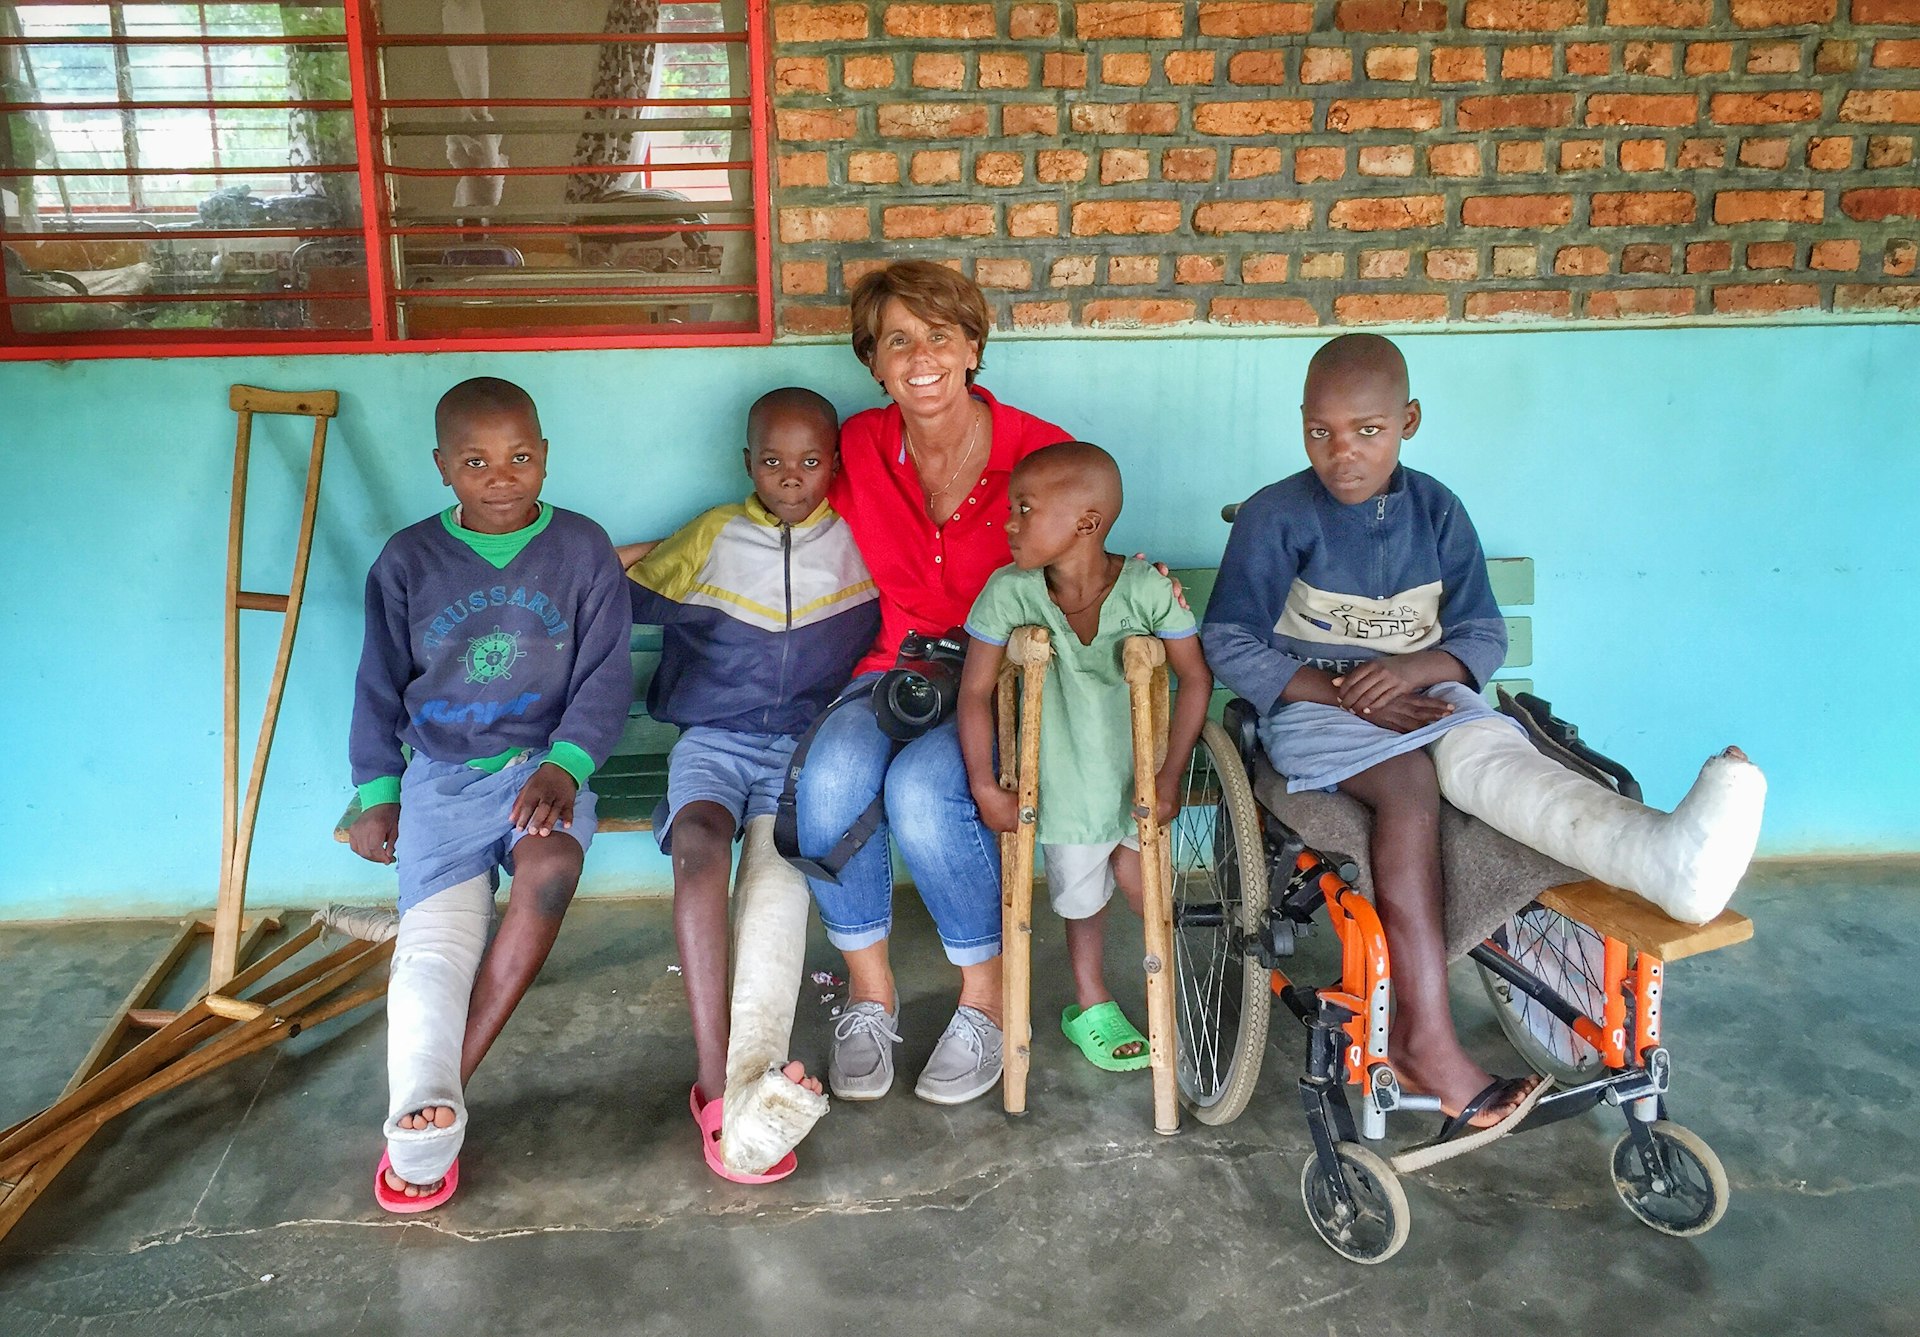 A woman sits on a bench with a group of four children. Two children have a leg in a cast. One is resting on crutches. The fourth child is in a wheelchair